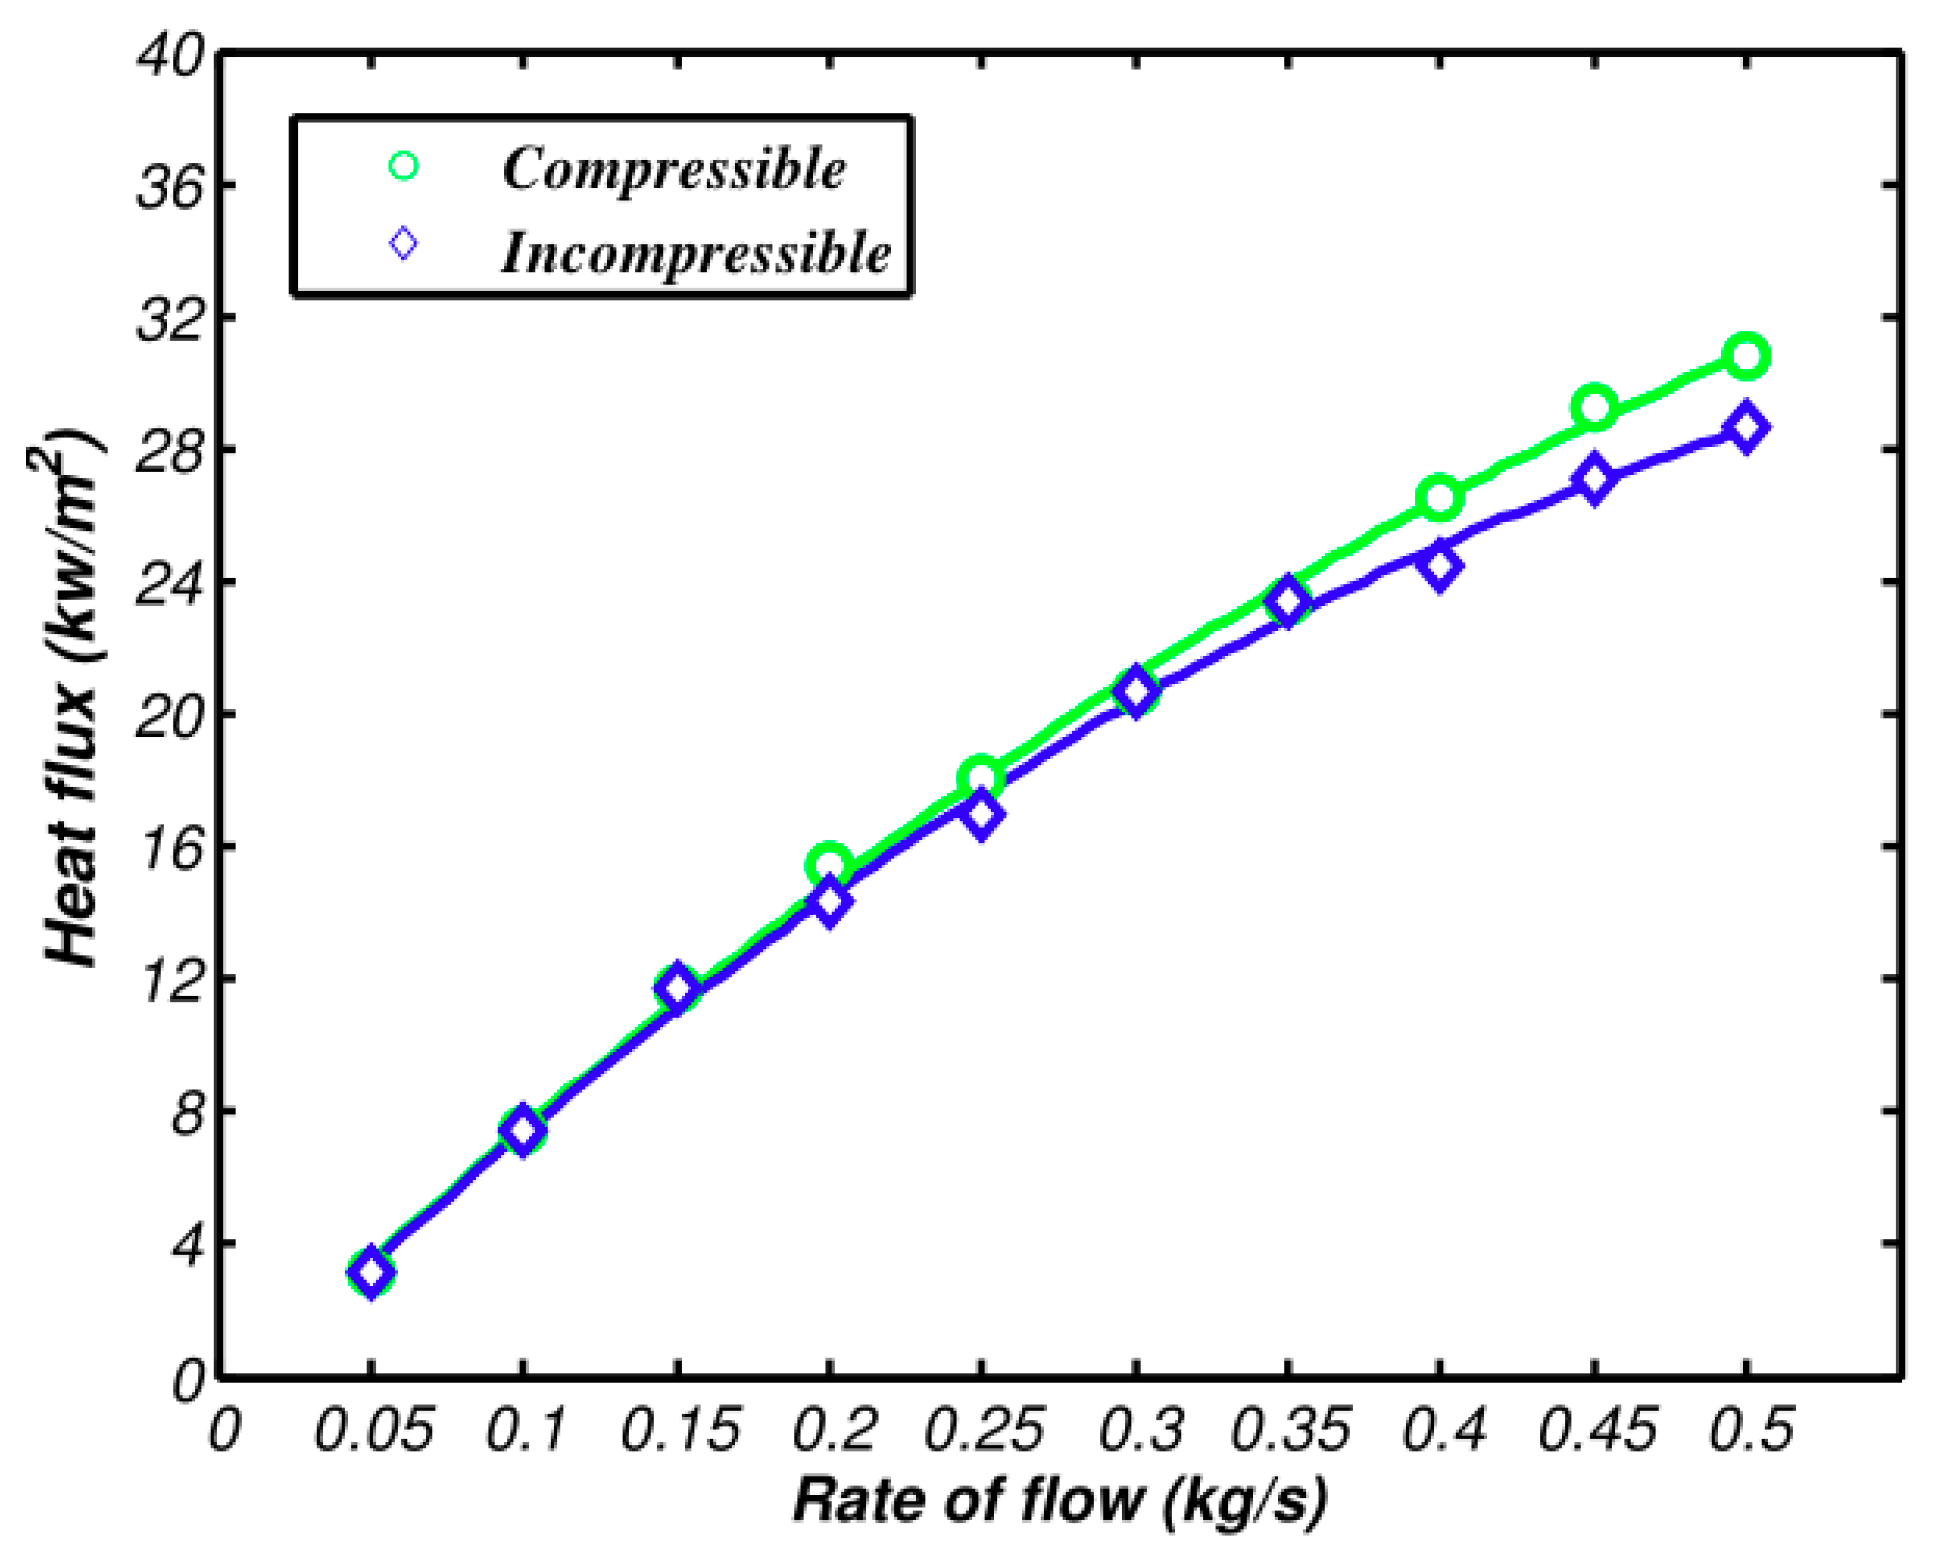 thermodynamics - Variation of compressiblity factor with temperature -  Chemistry Stack Exchange